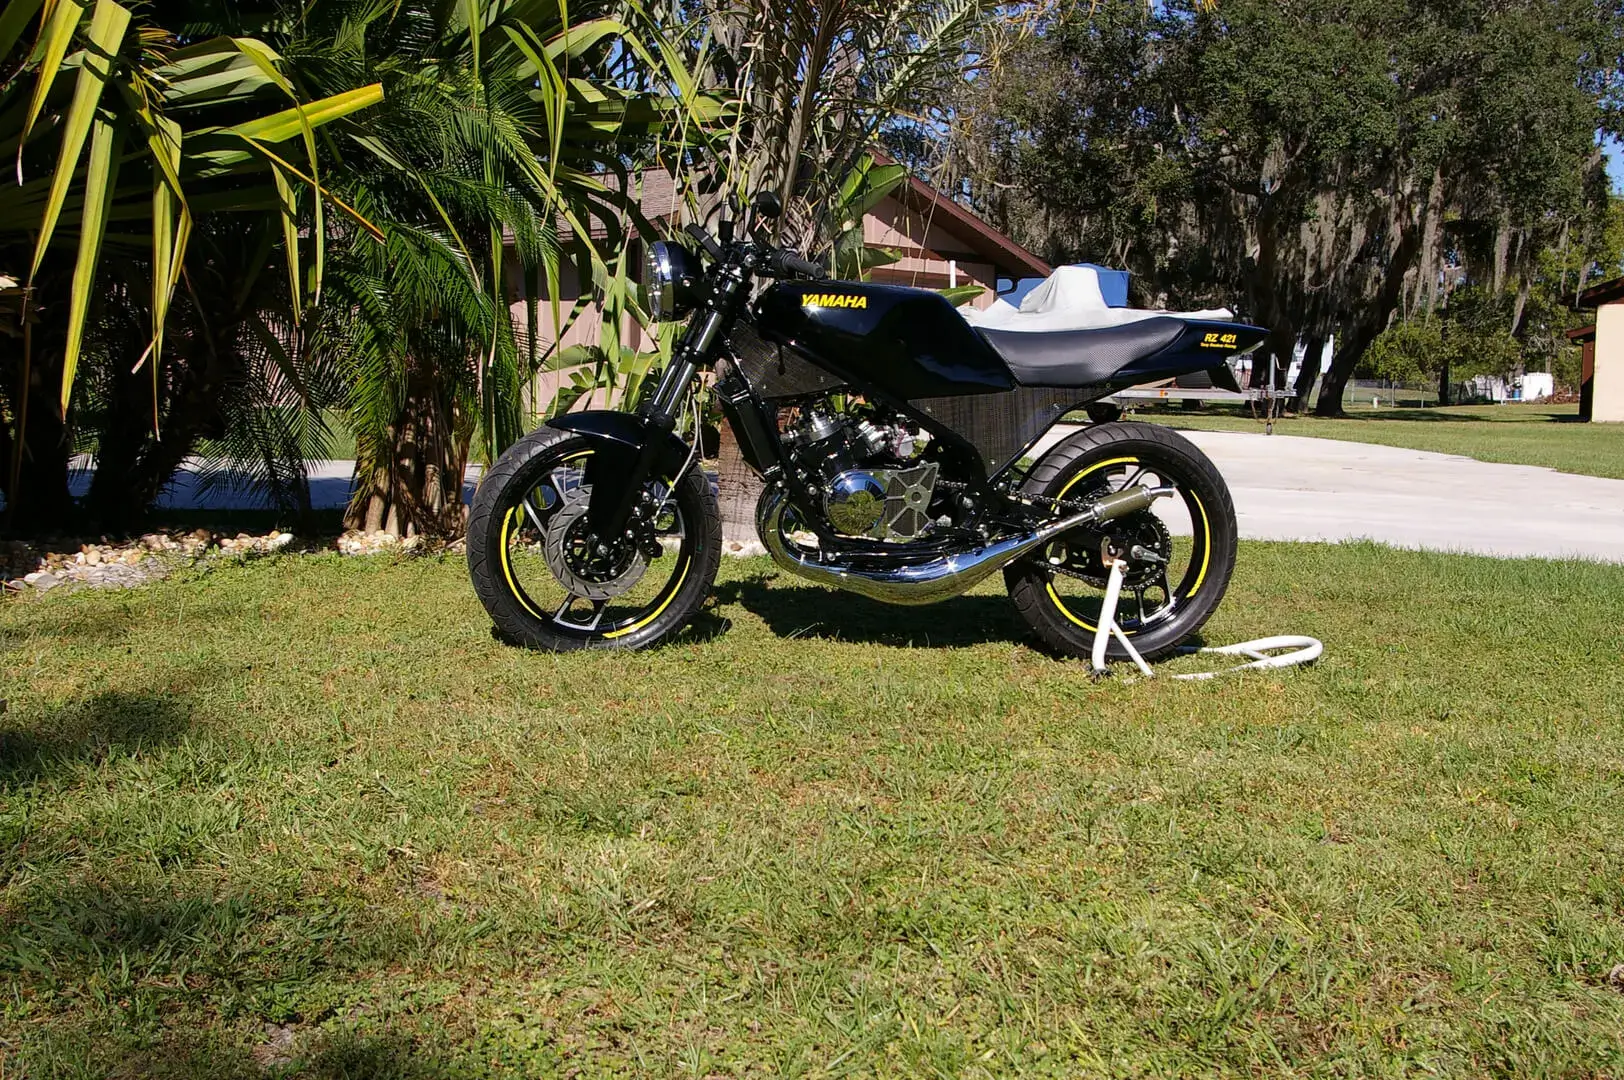 A motorcycle parked in the grass near some trees.